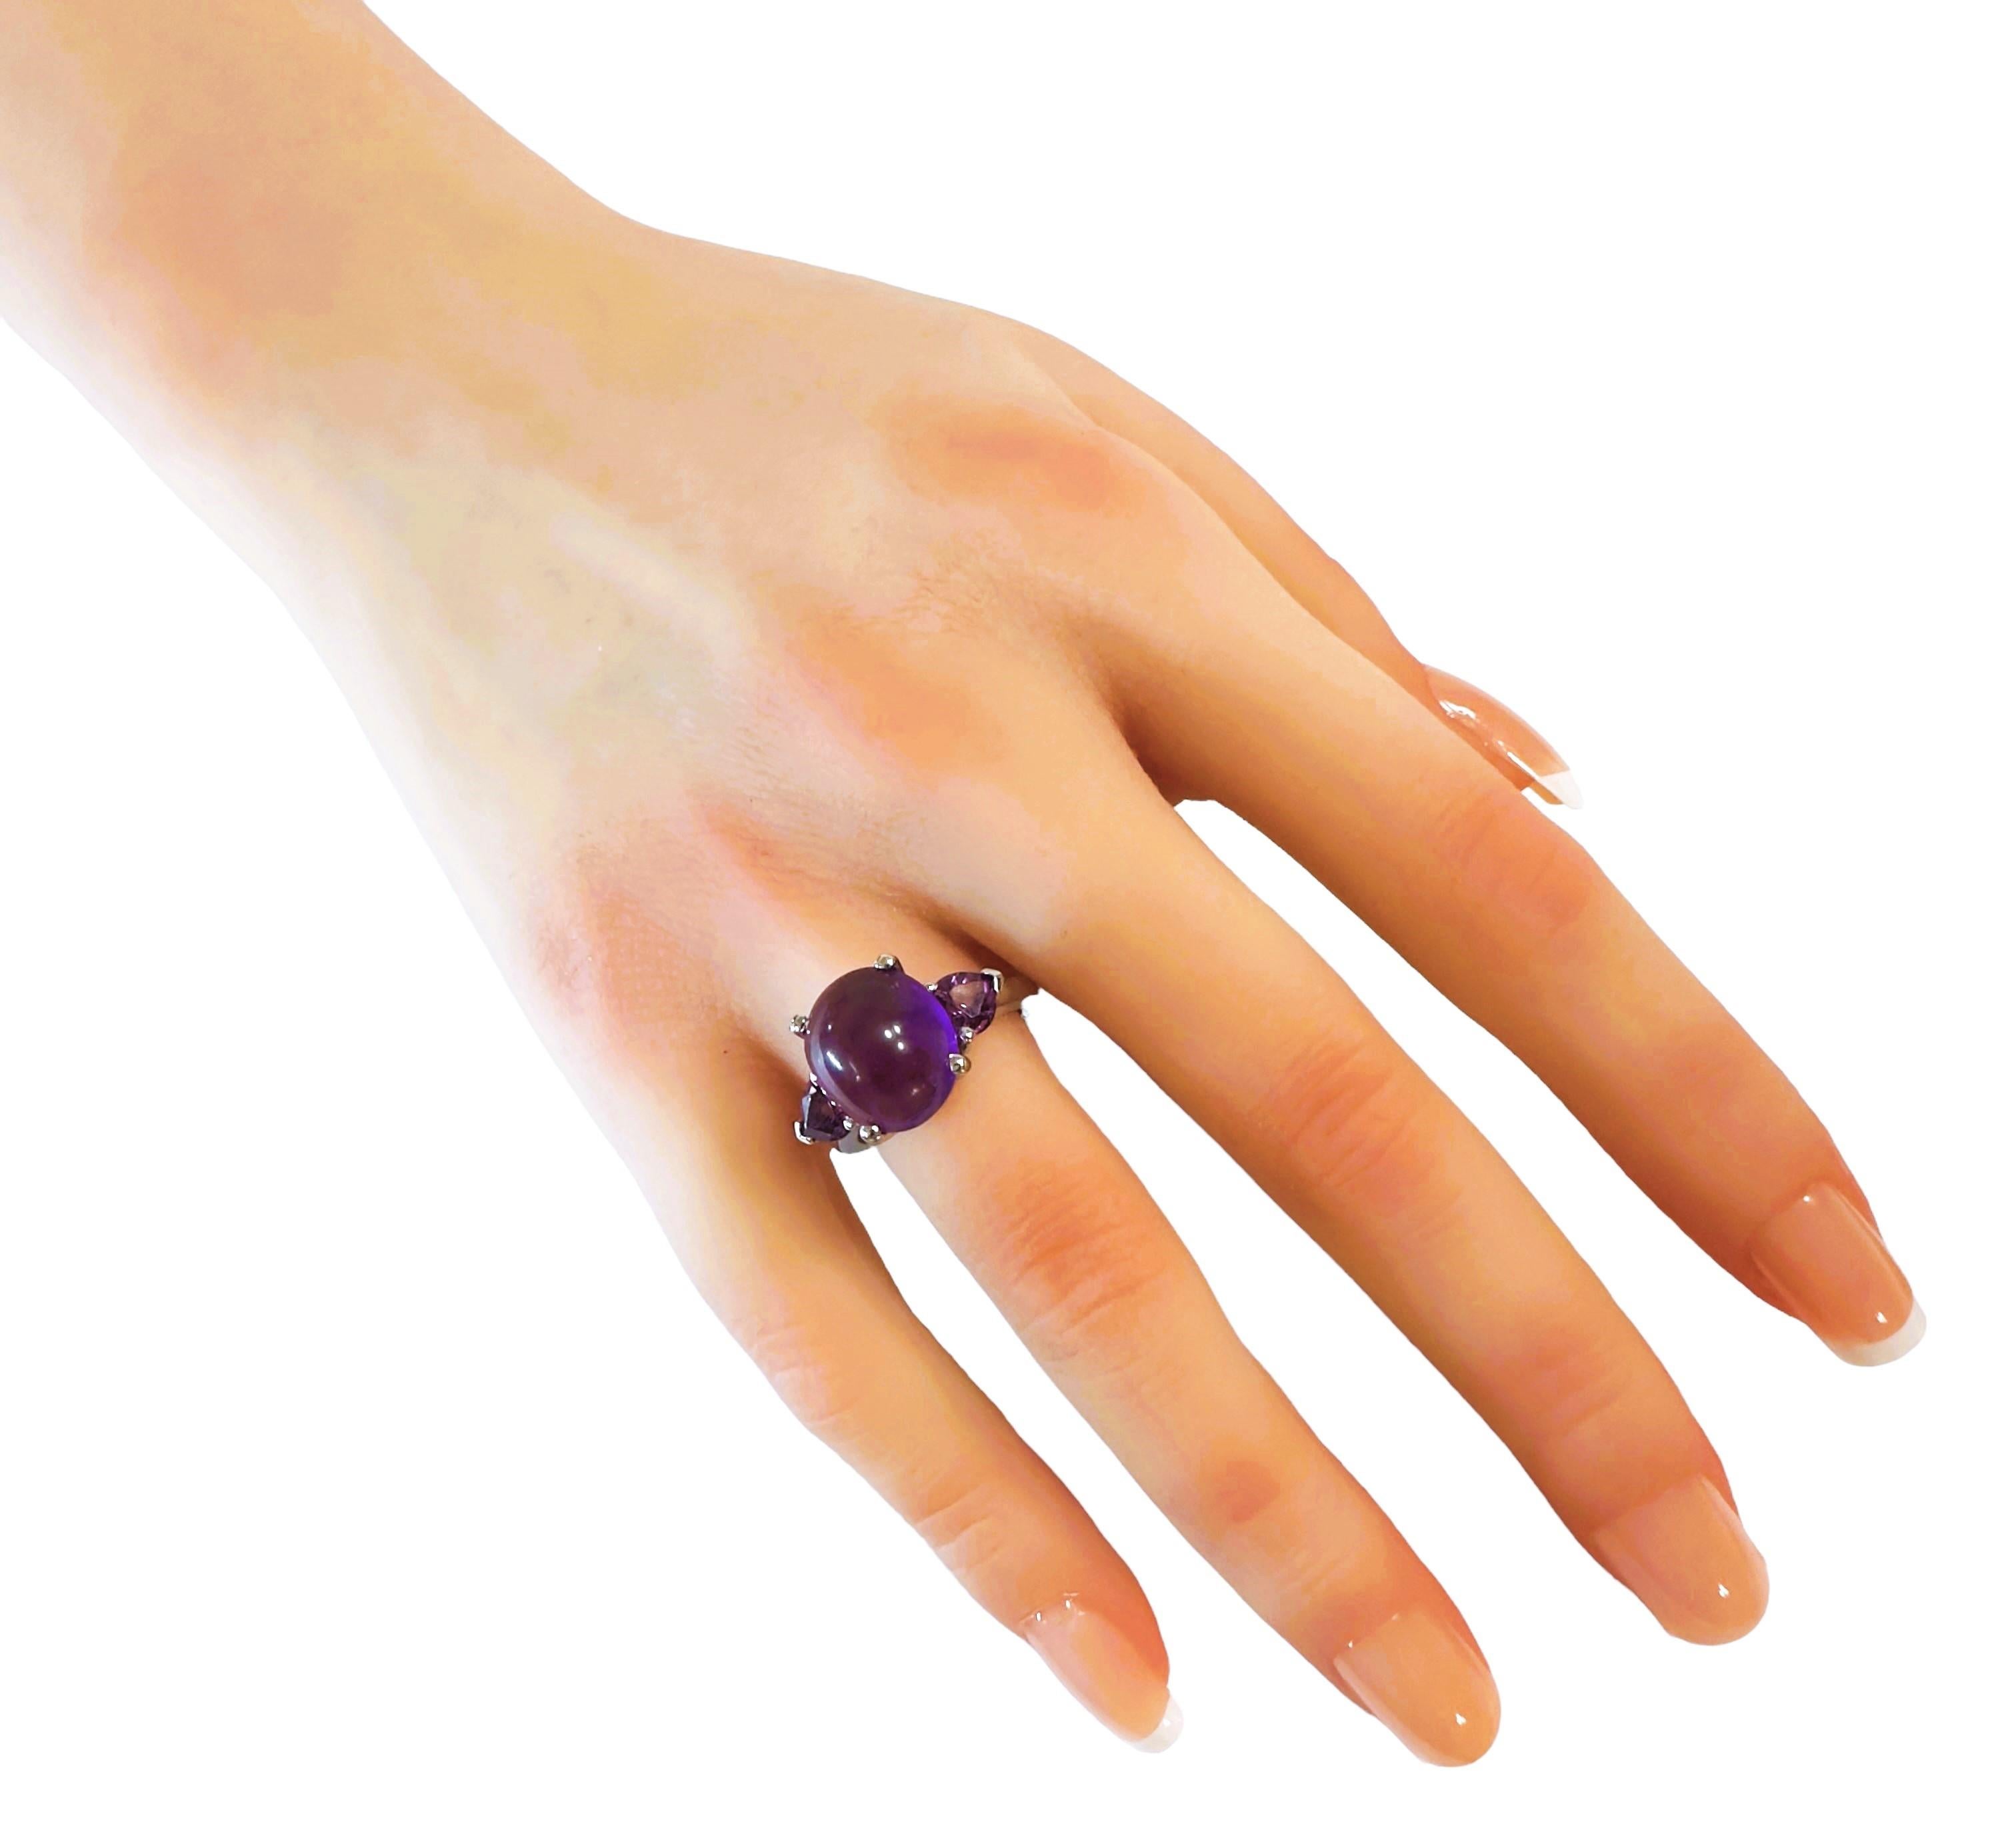 New Brazilian 7.3 Ct Cabochon & Trillion Cut Amethyst Sterling Ring Size 7 For Sale 2